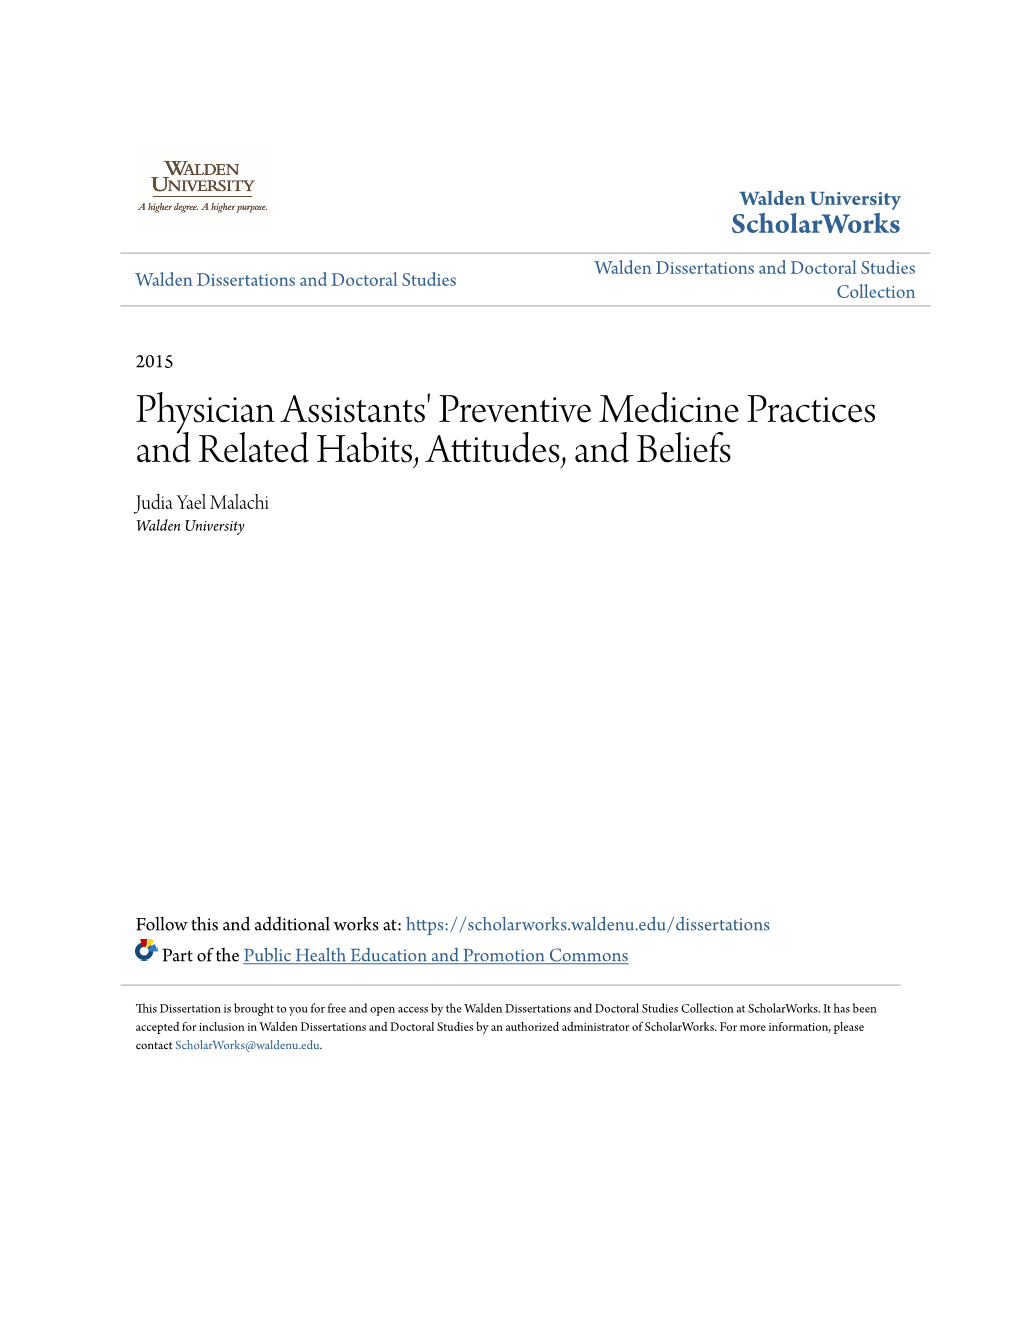 Physician Assistants' Preventive Medicine Practices and Related Habits, Attitudes, and Beliefs Judia Yael Malachi Walden University